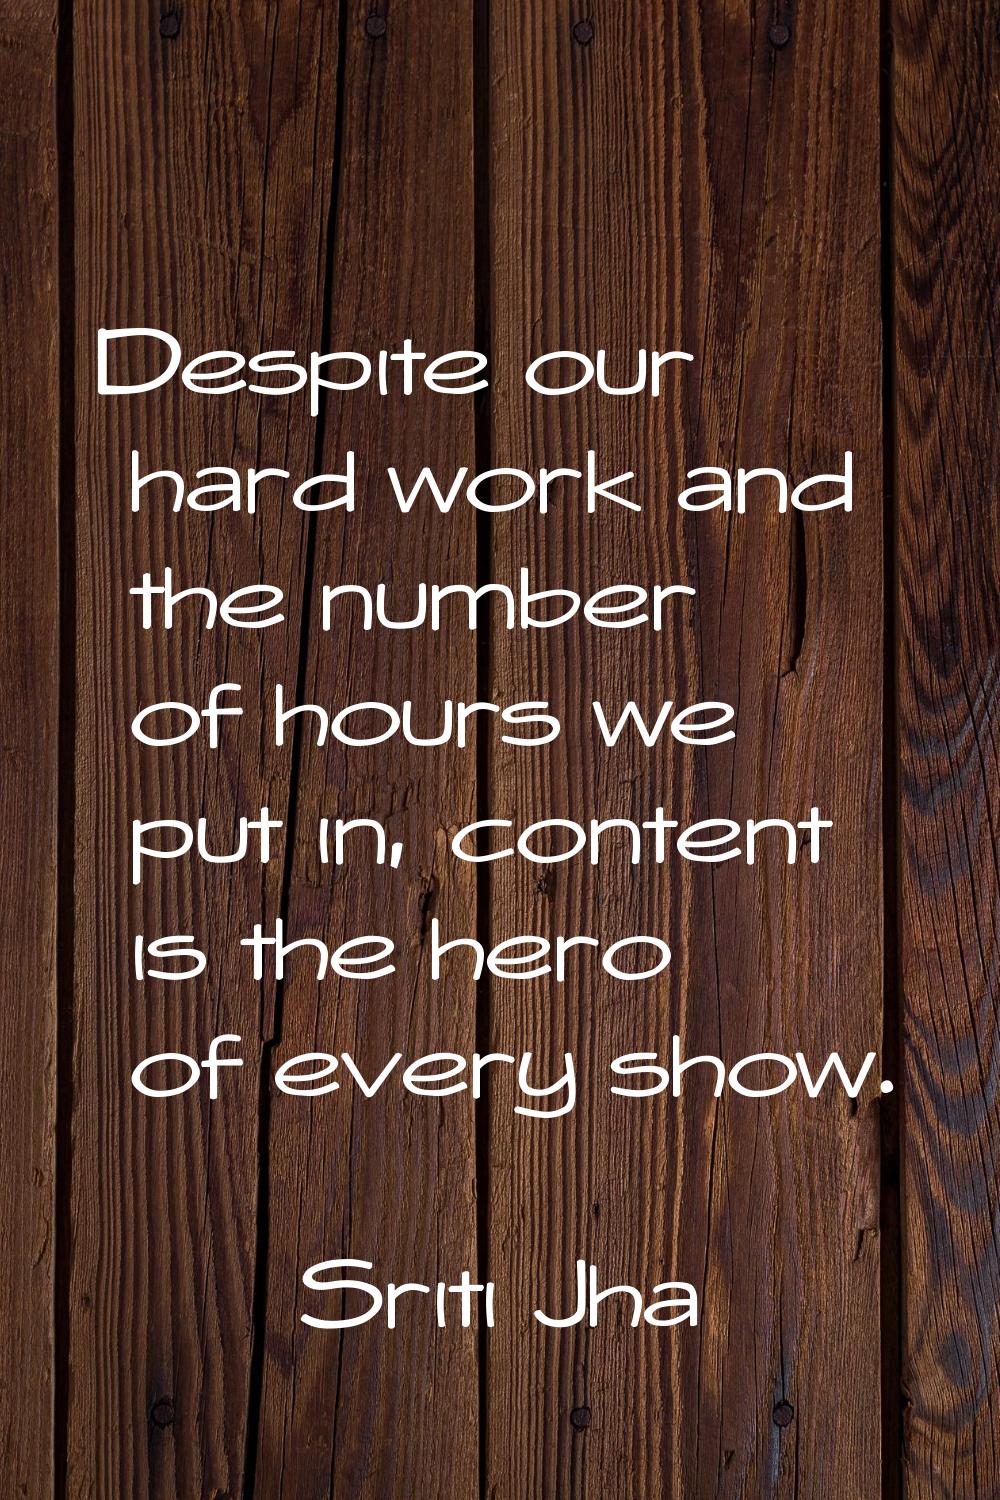 Despite our hard work and the number of hours we put in, content is the hero of every show.